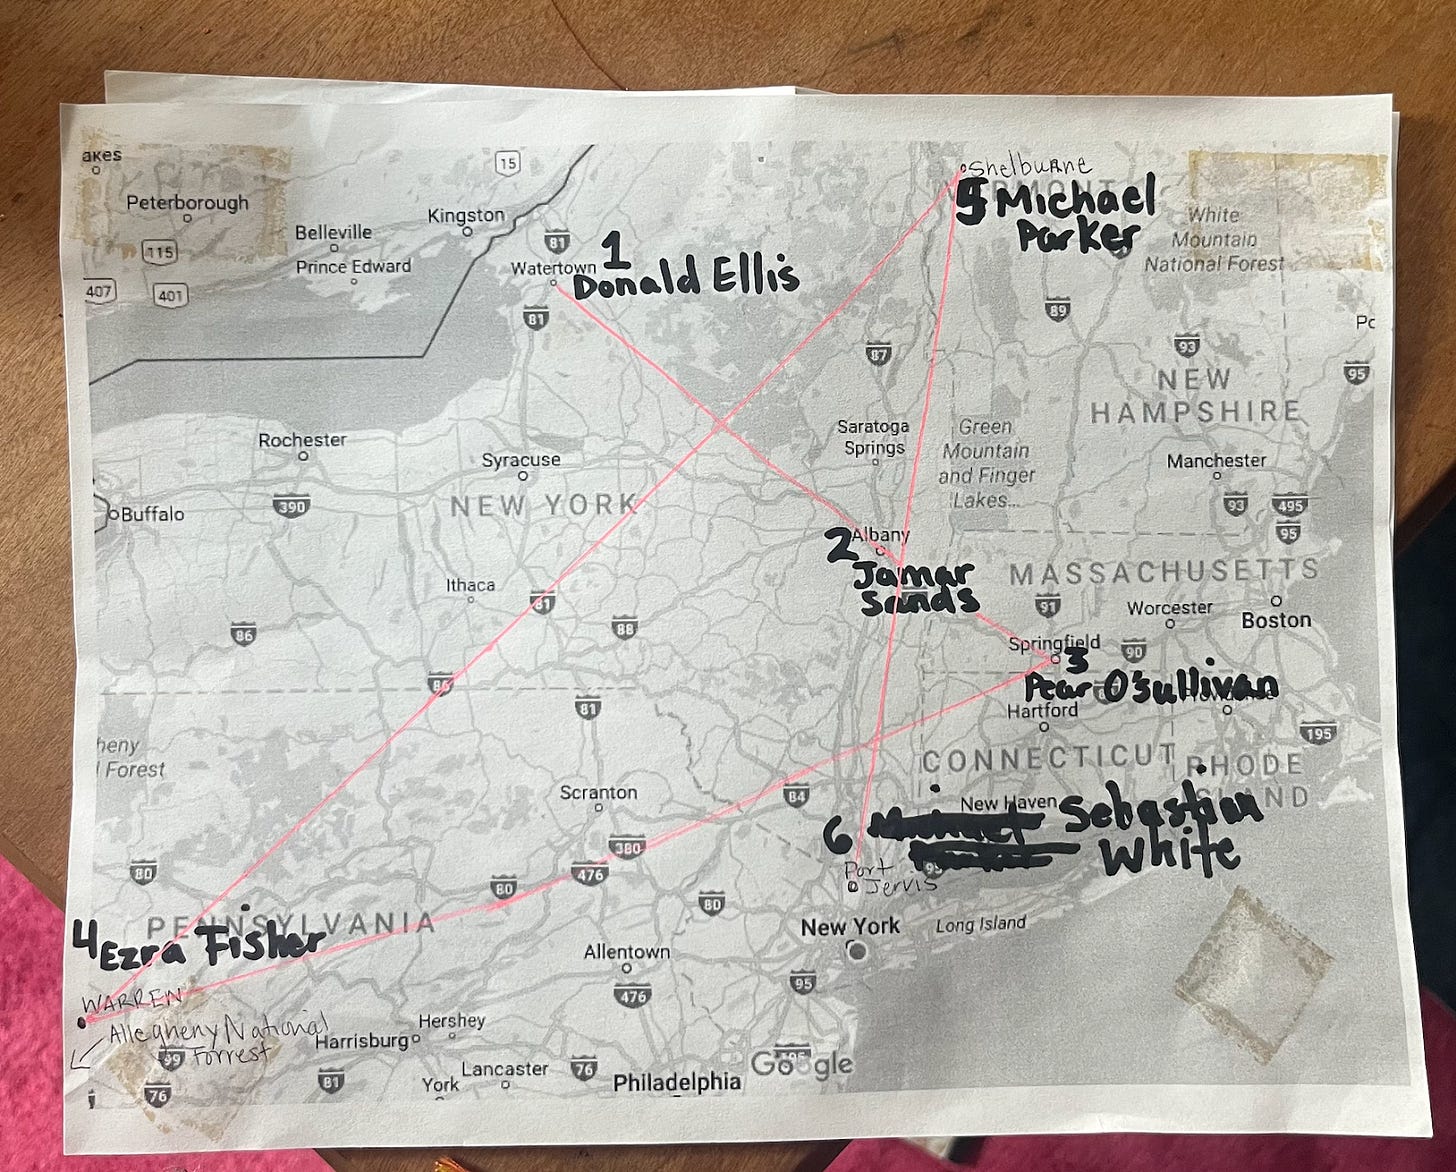 A printed out map of the Northeastern United States from Pennsylvania to Vermont. Character names from "Any Man," notes, and lines connecting various locations have been written and drawn onto the map by hand. 